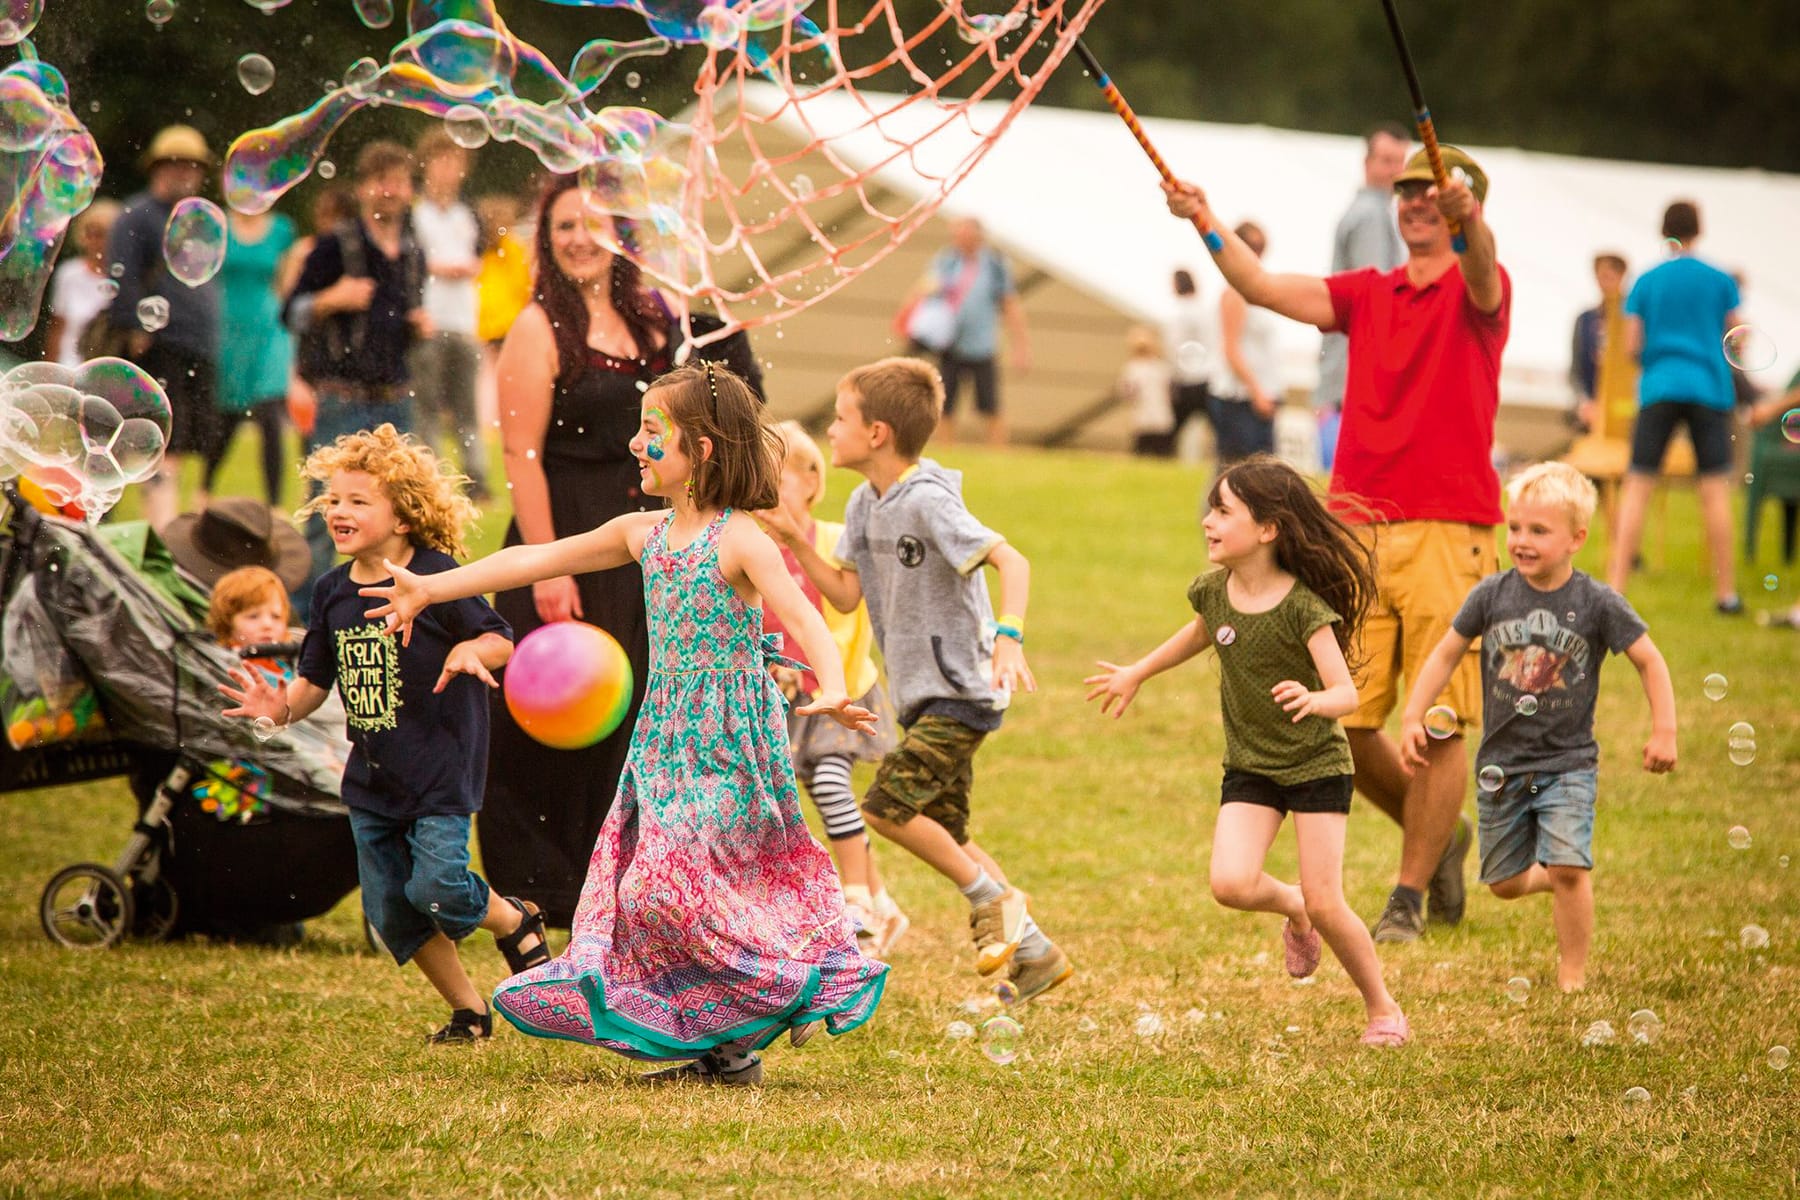 Photograph showing children at a festival running after giant bubbles